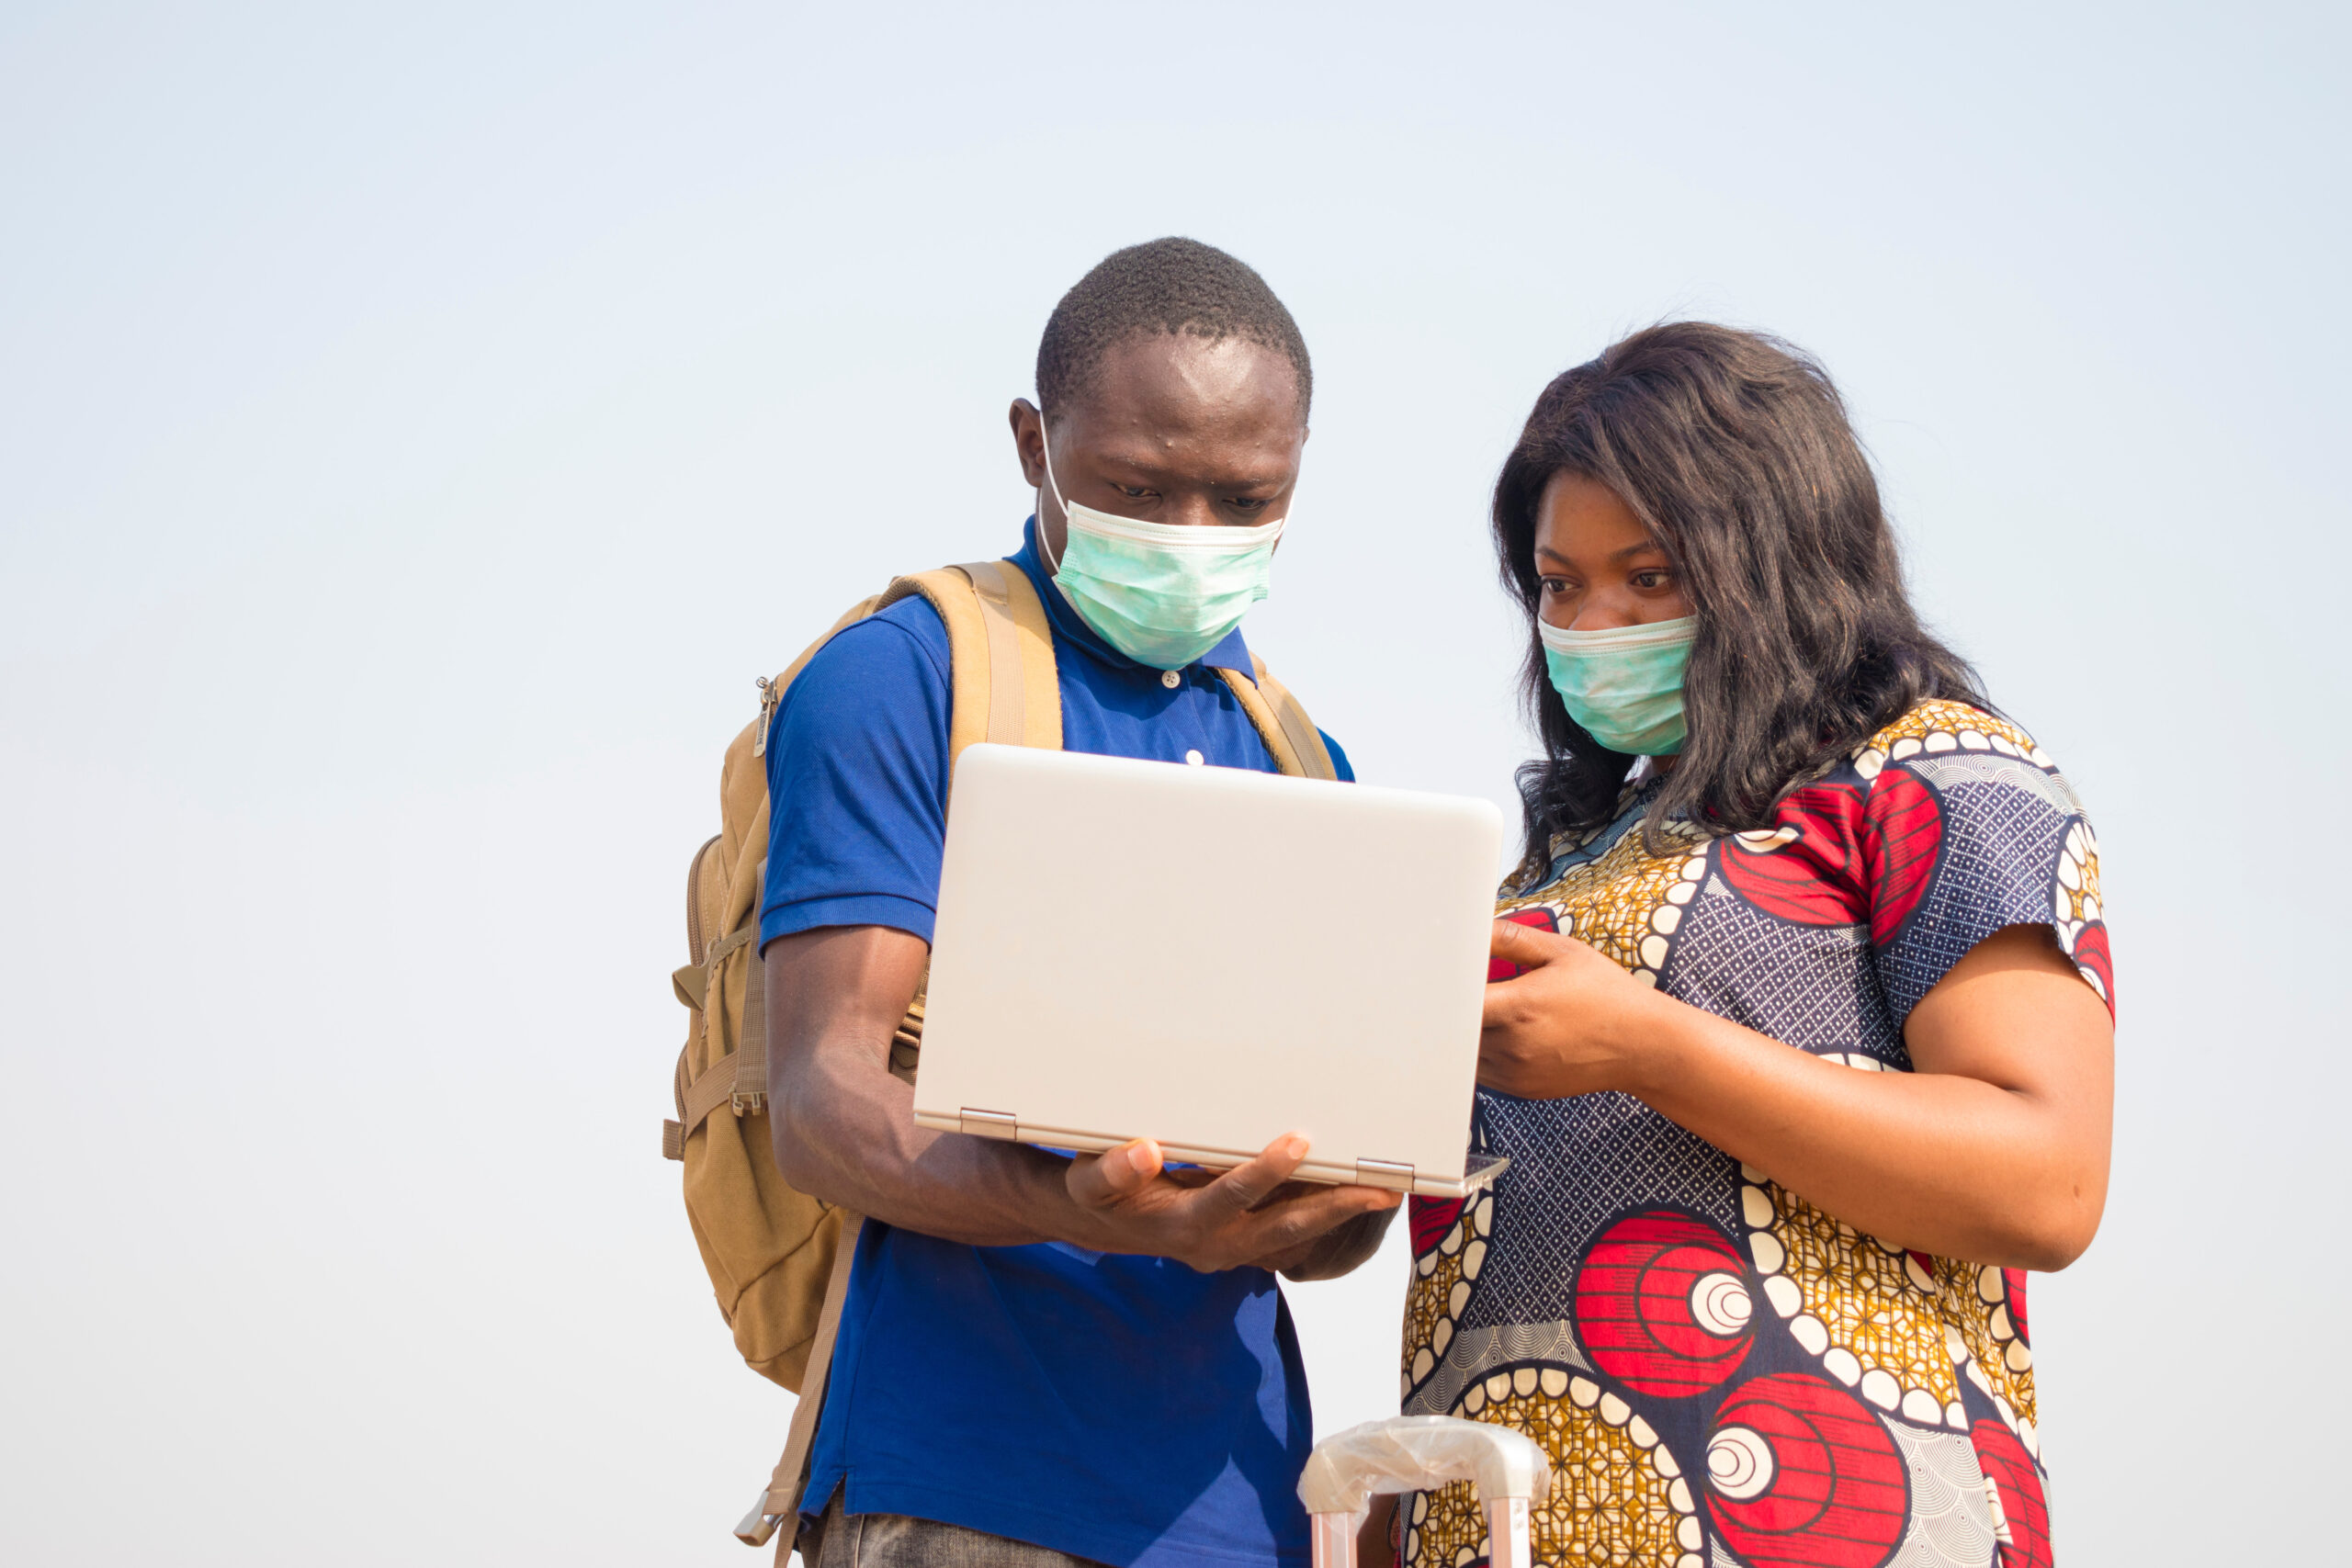 Man and woman with facemasks looking at a laptop computer.